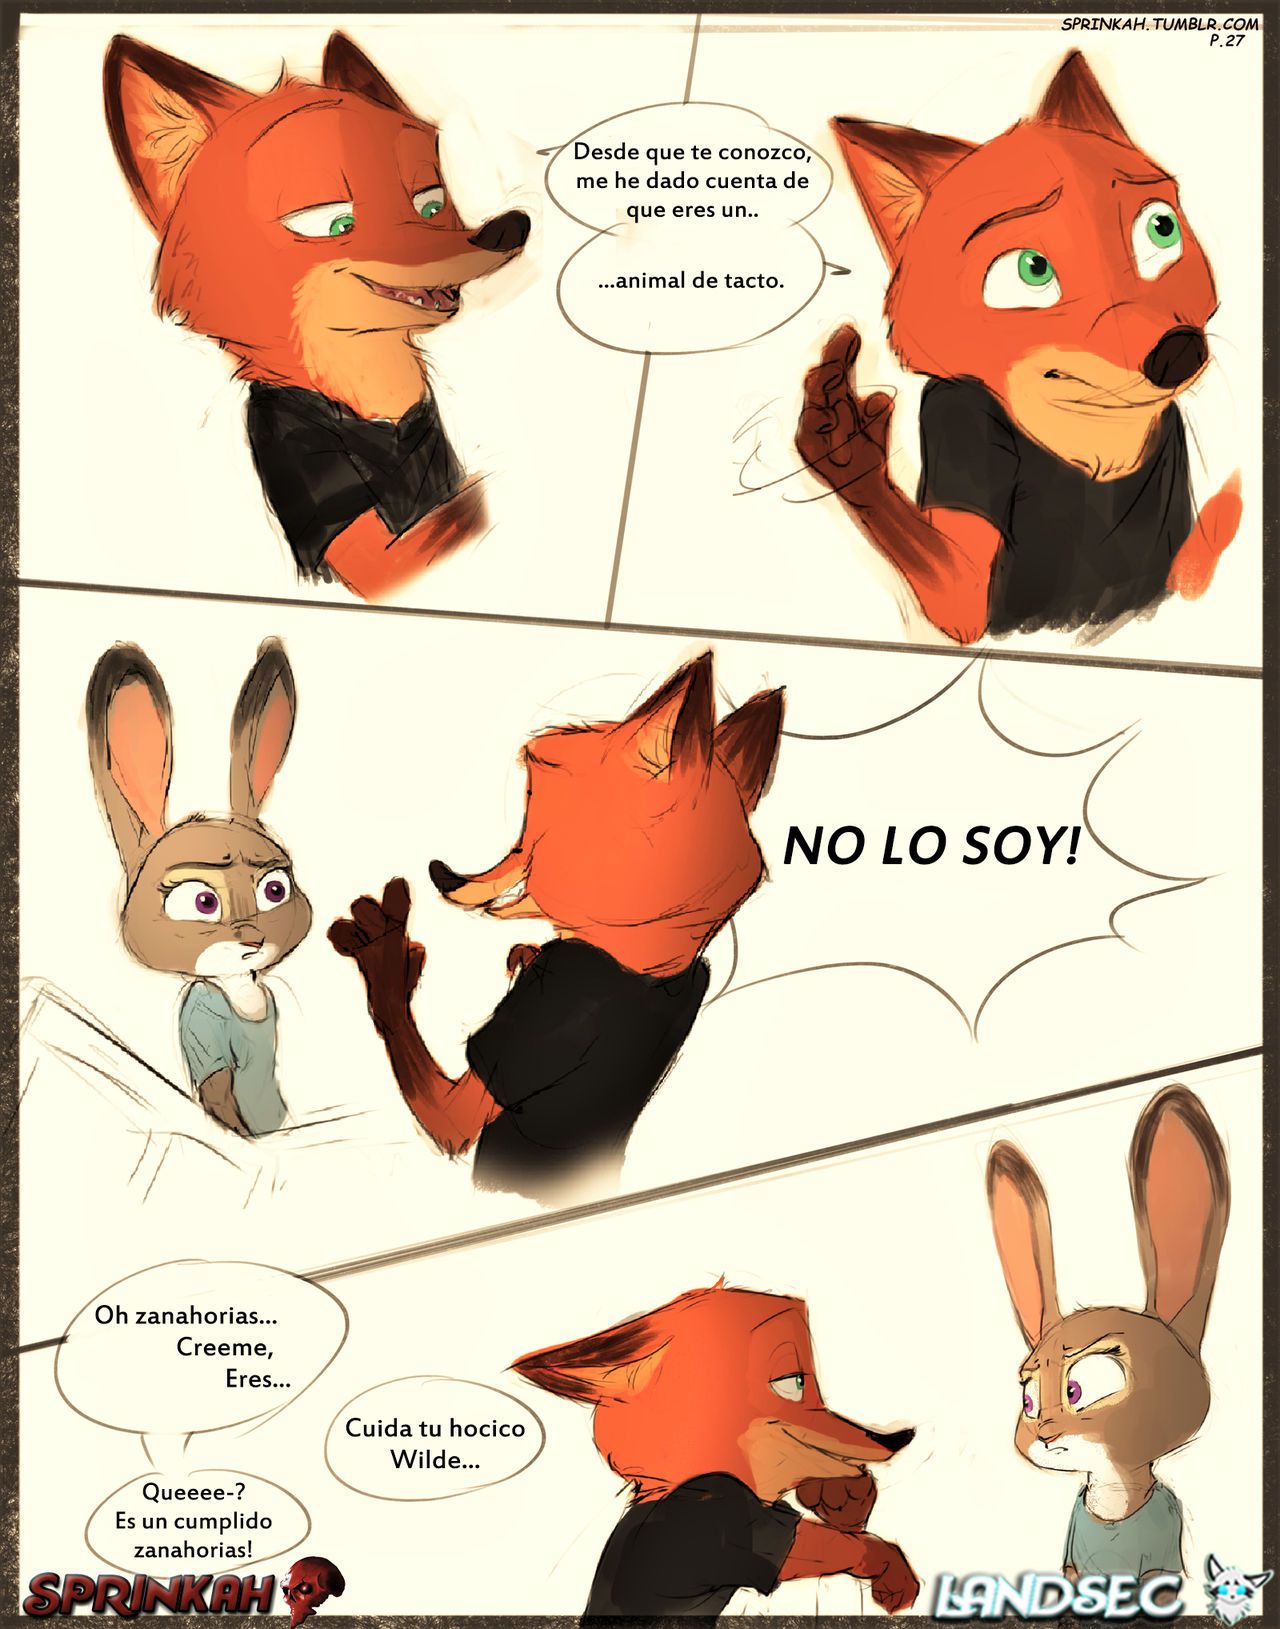 [Sprinkah] This is what true love looks like (Zootopia) (Spanish) (On Going) [Landsec] http://sprinkah.tumblr.com/ 39